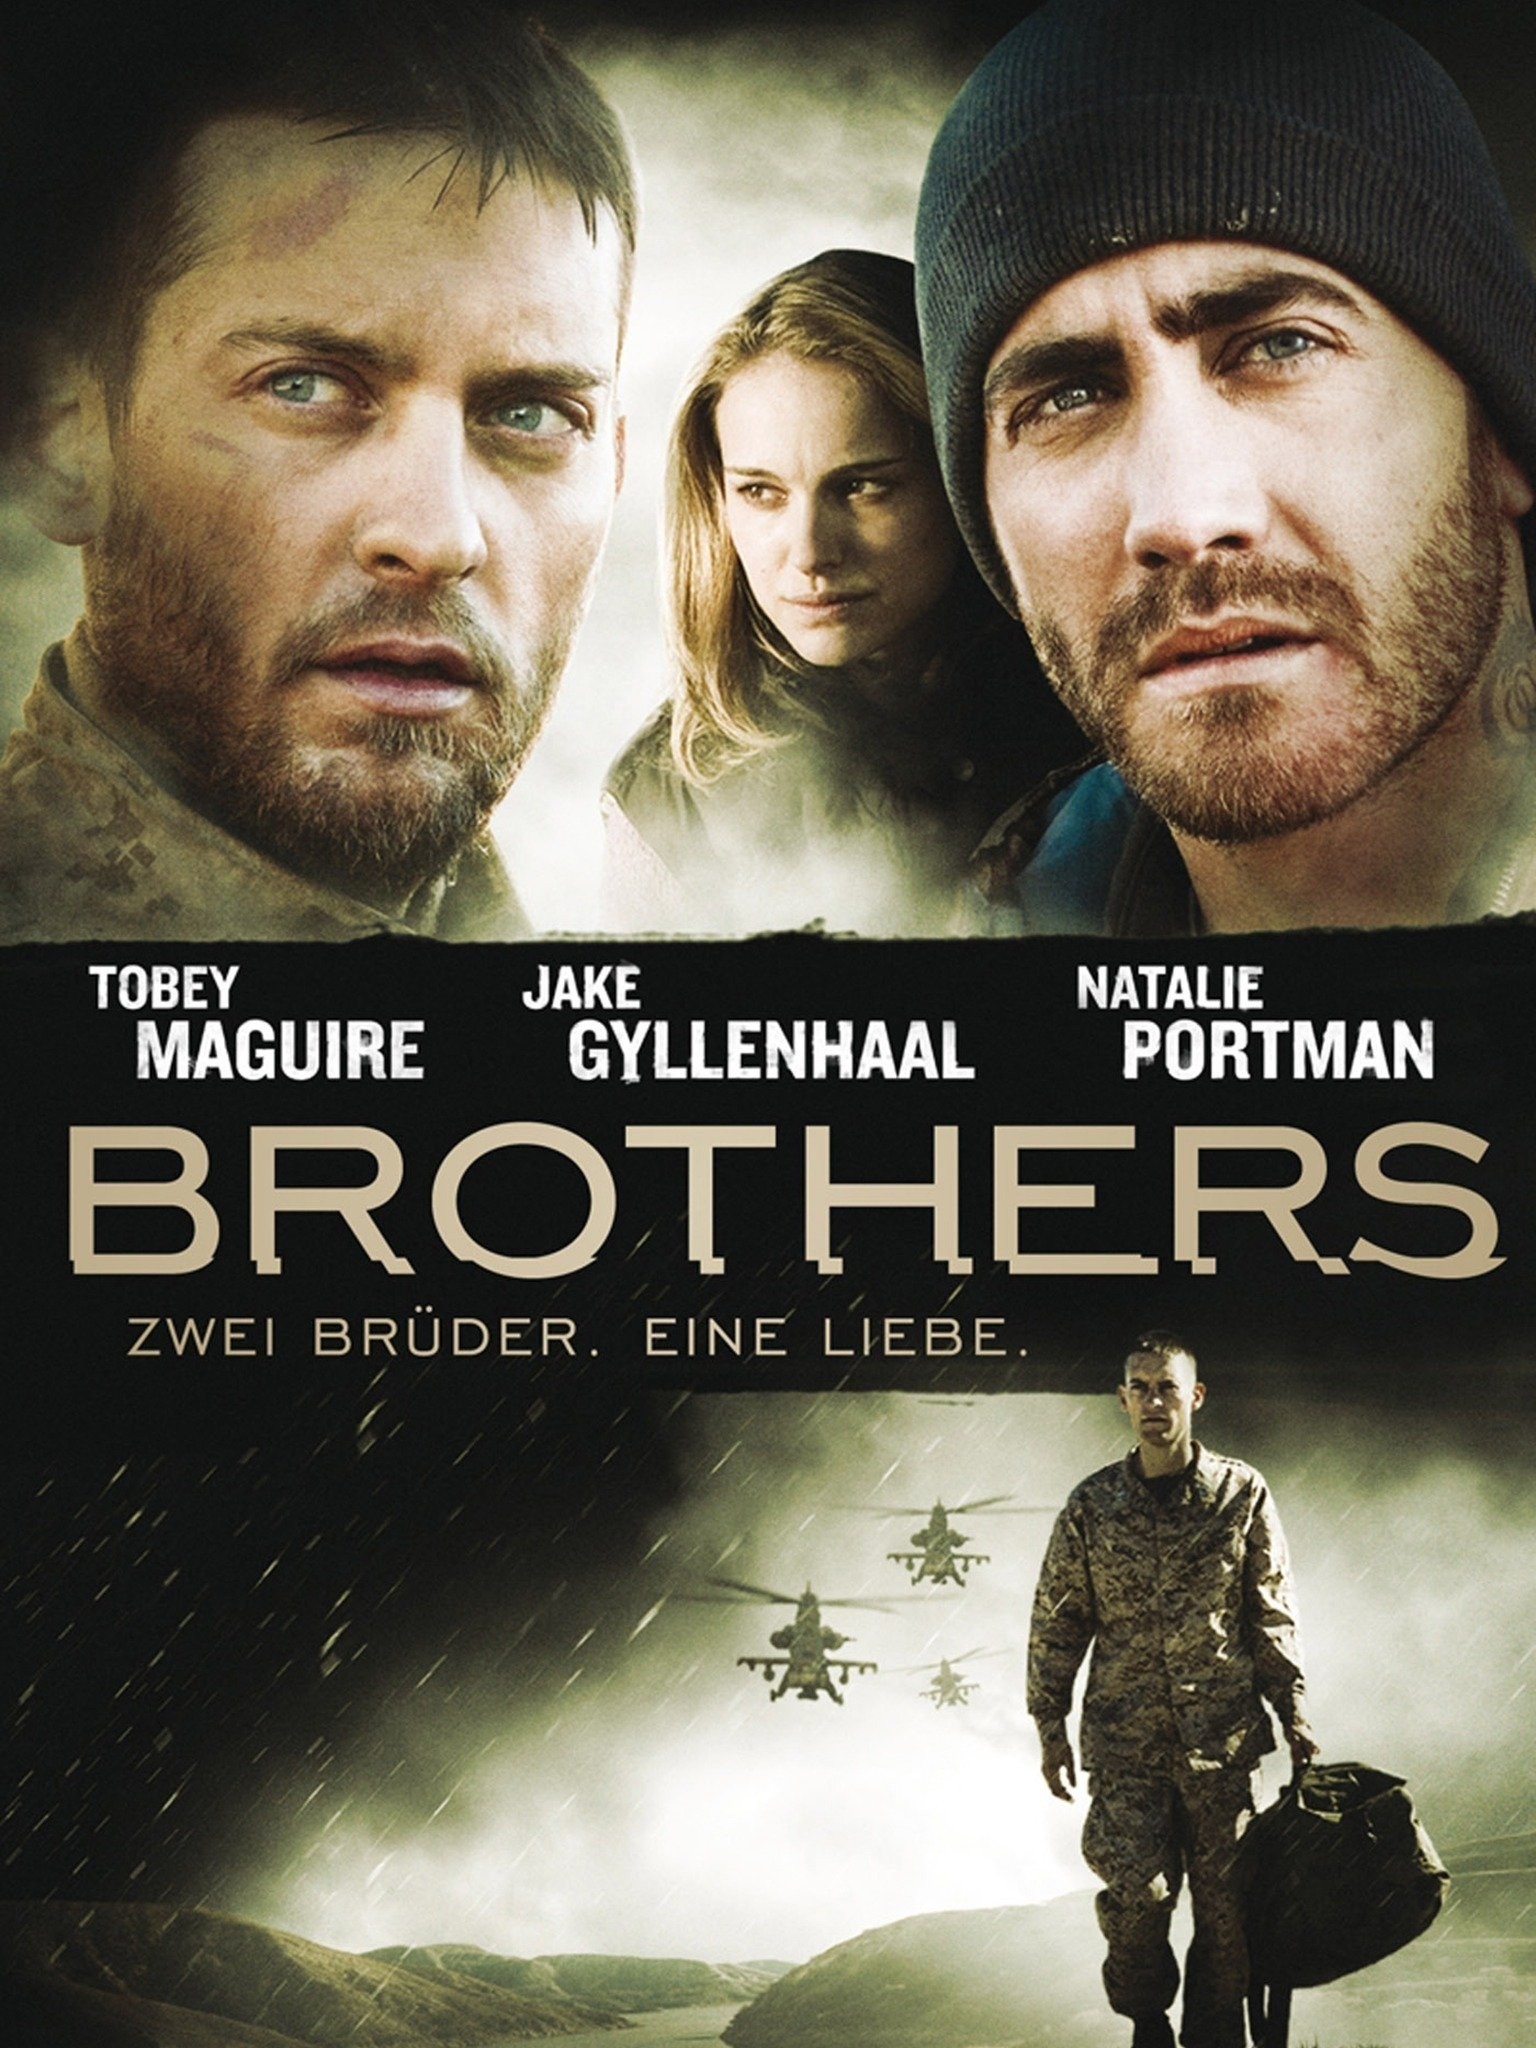 Brothers - Trailer (Tobey Maguire, Jake Gyllenhaal) 